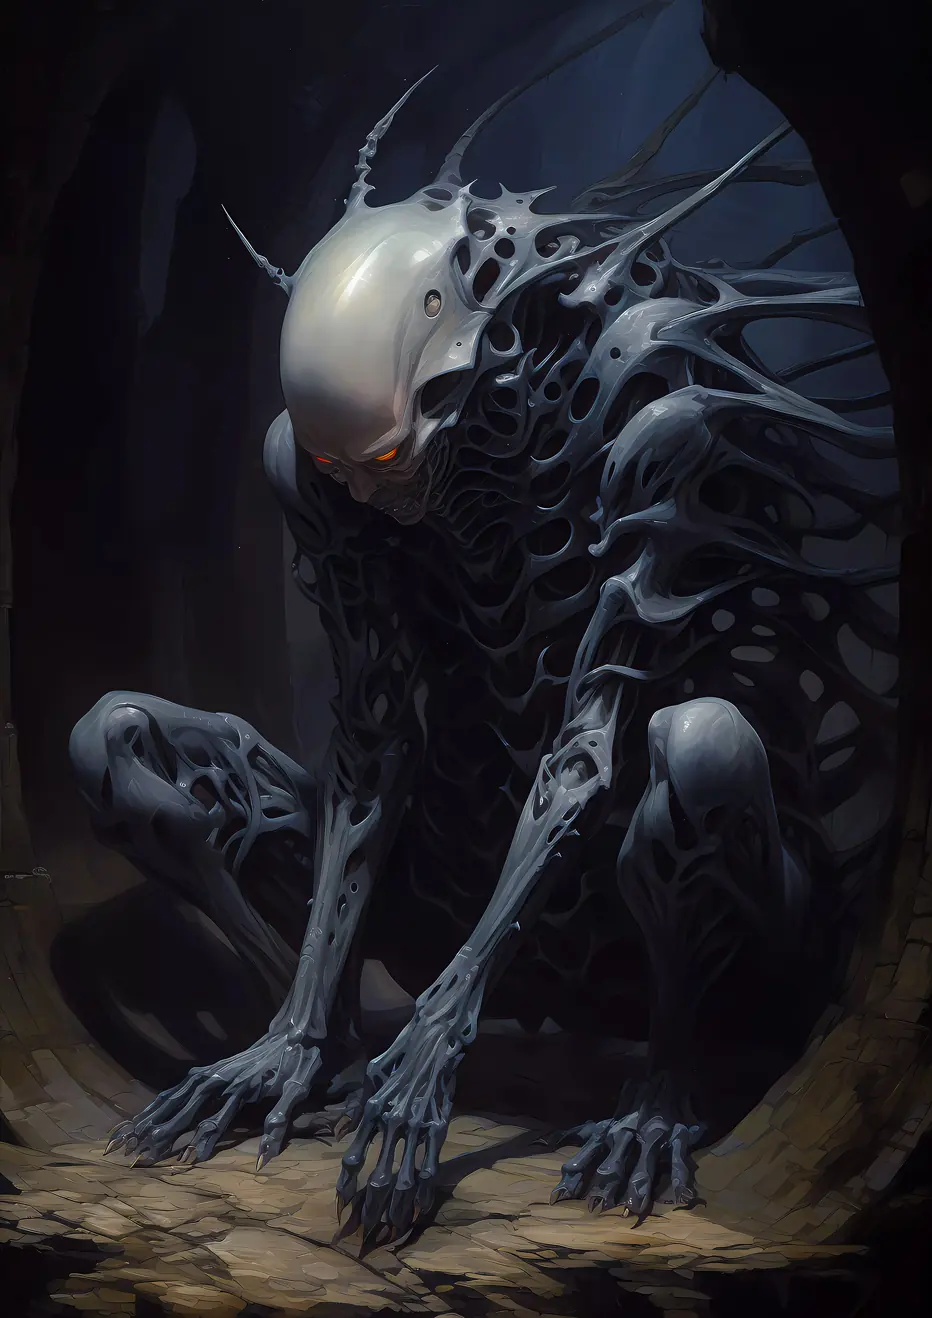 Skeletal Guardian: An alien-like creature with blue bone structures, glowing red eyes, and a pale white head.